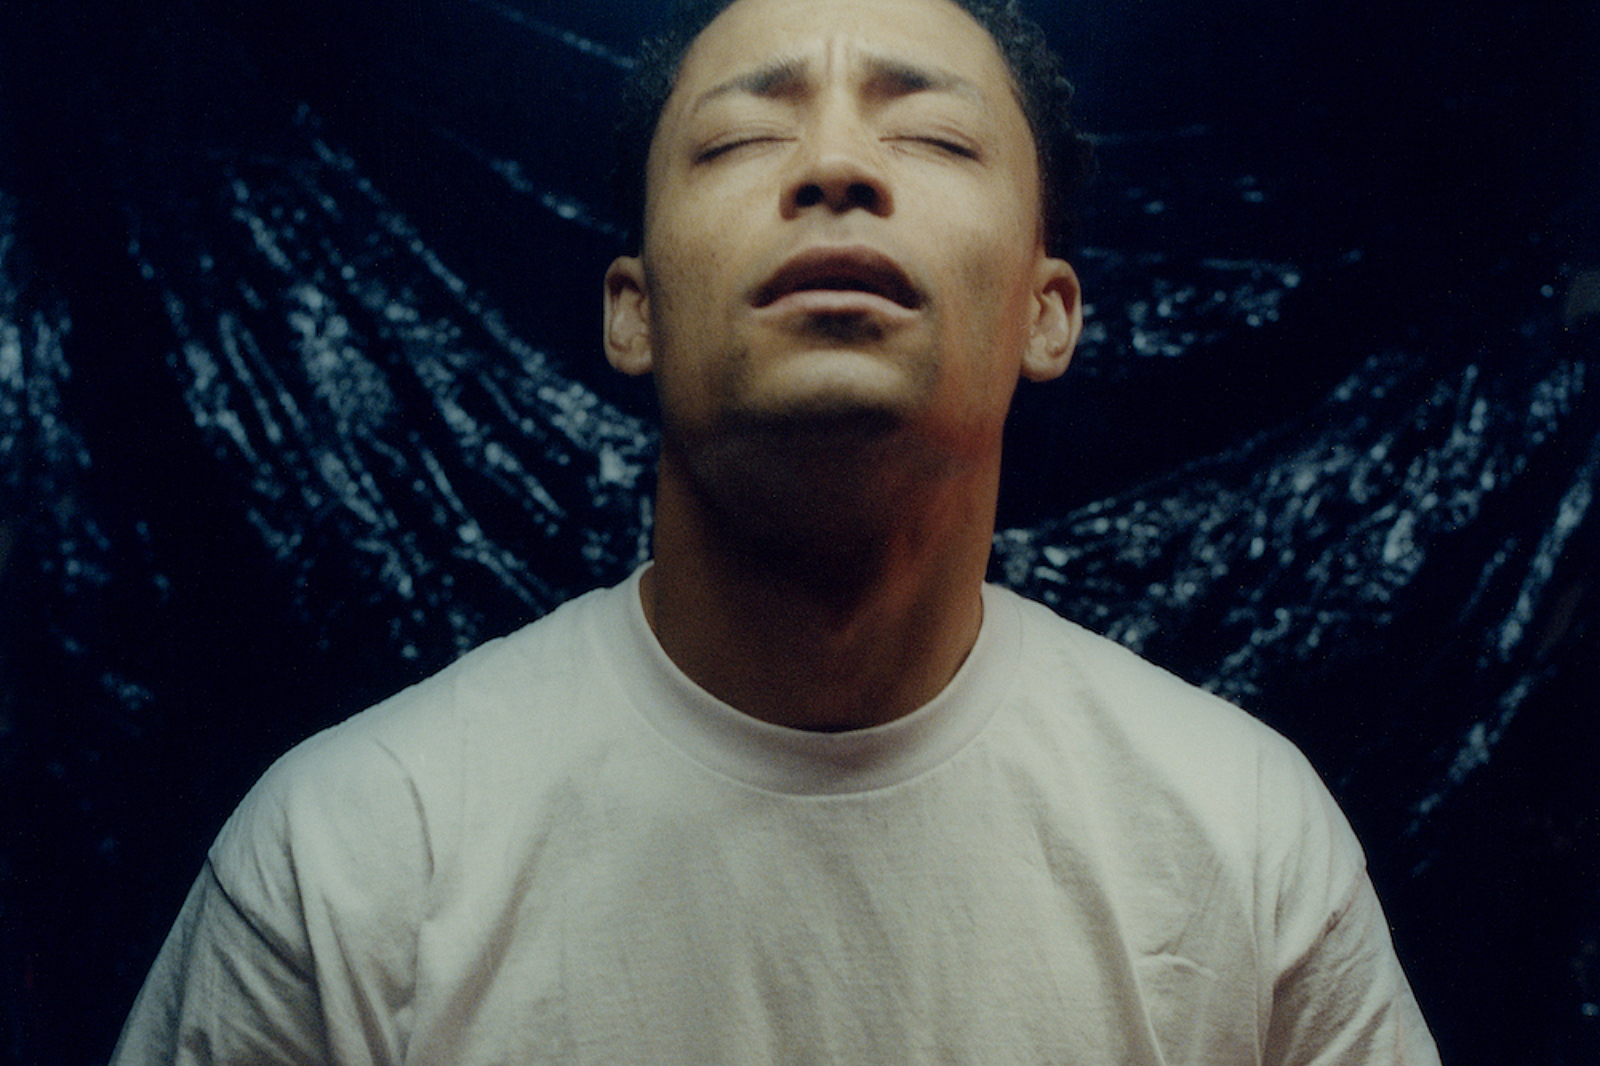 Loyle Carner returns with new track 'Hate'